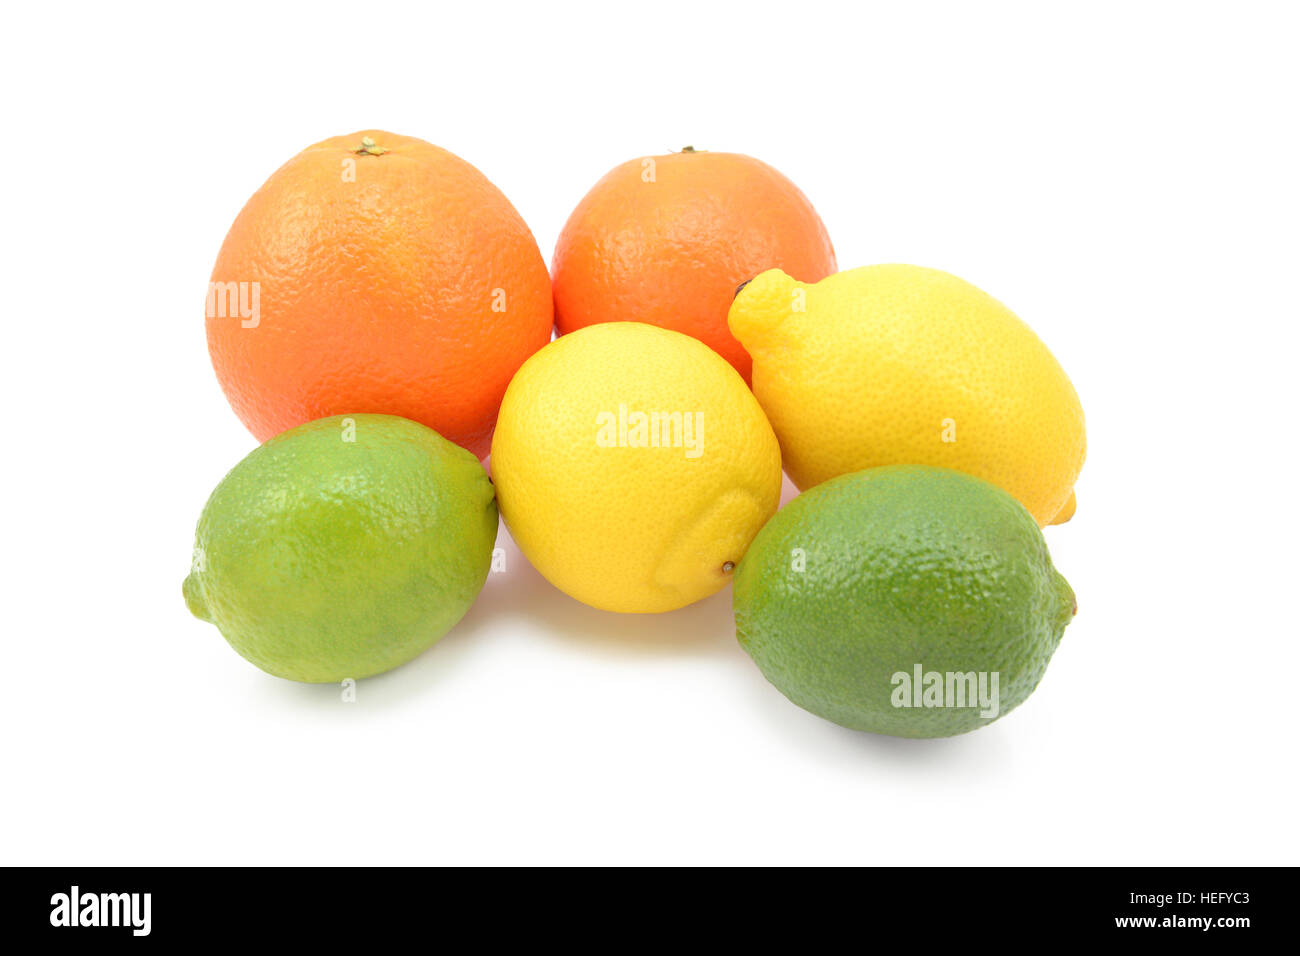 Six citrus fruits - limes, lemons and oranges - isolated on a white background Stock Photo